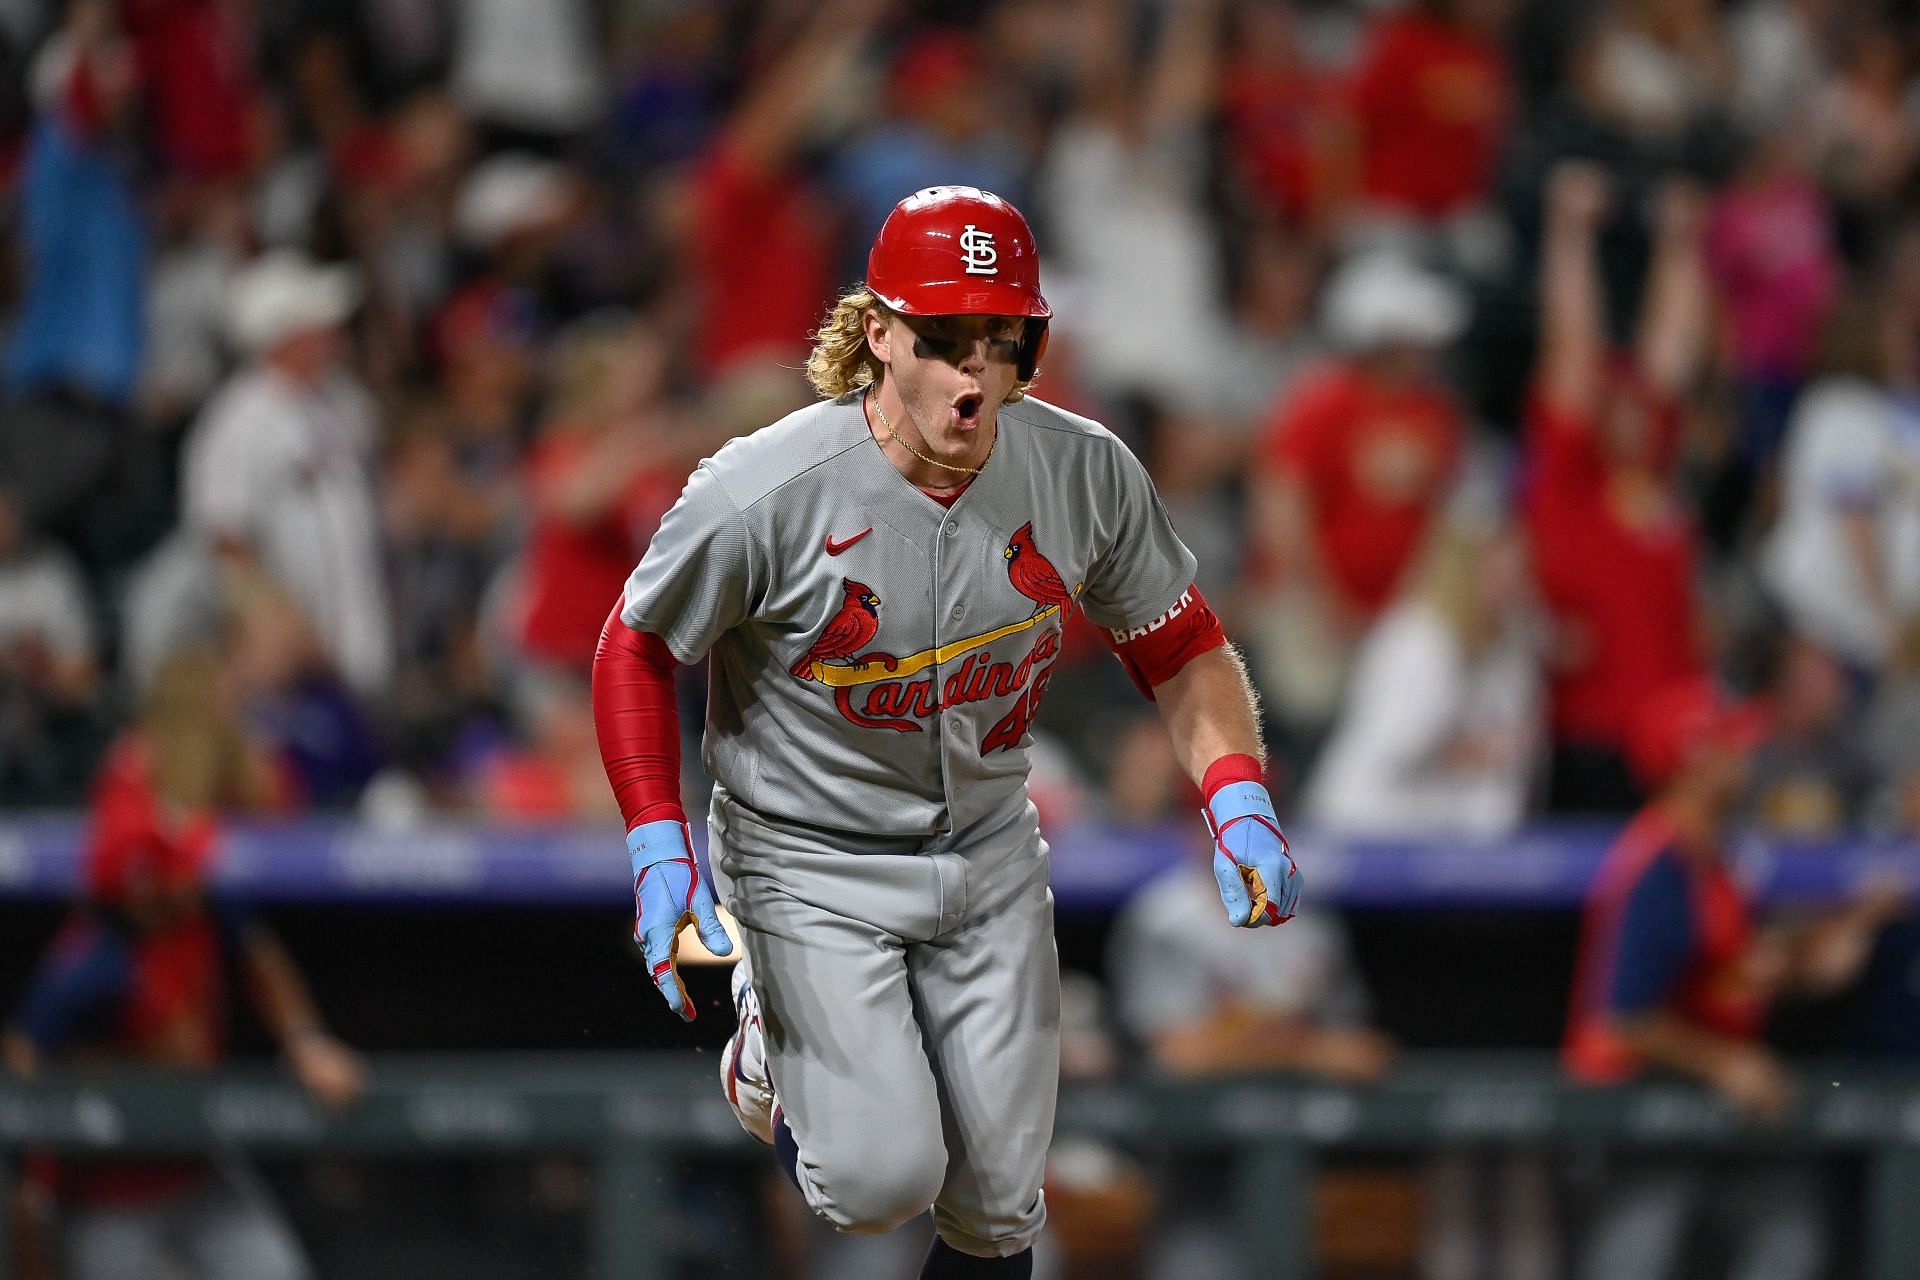 Harrison Bader, The Sabermetric Darling of St.Louis – Max's